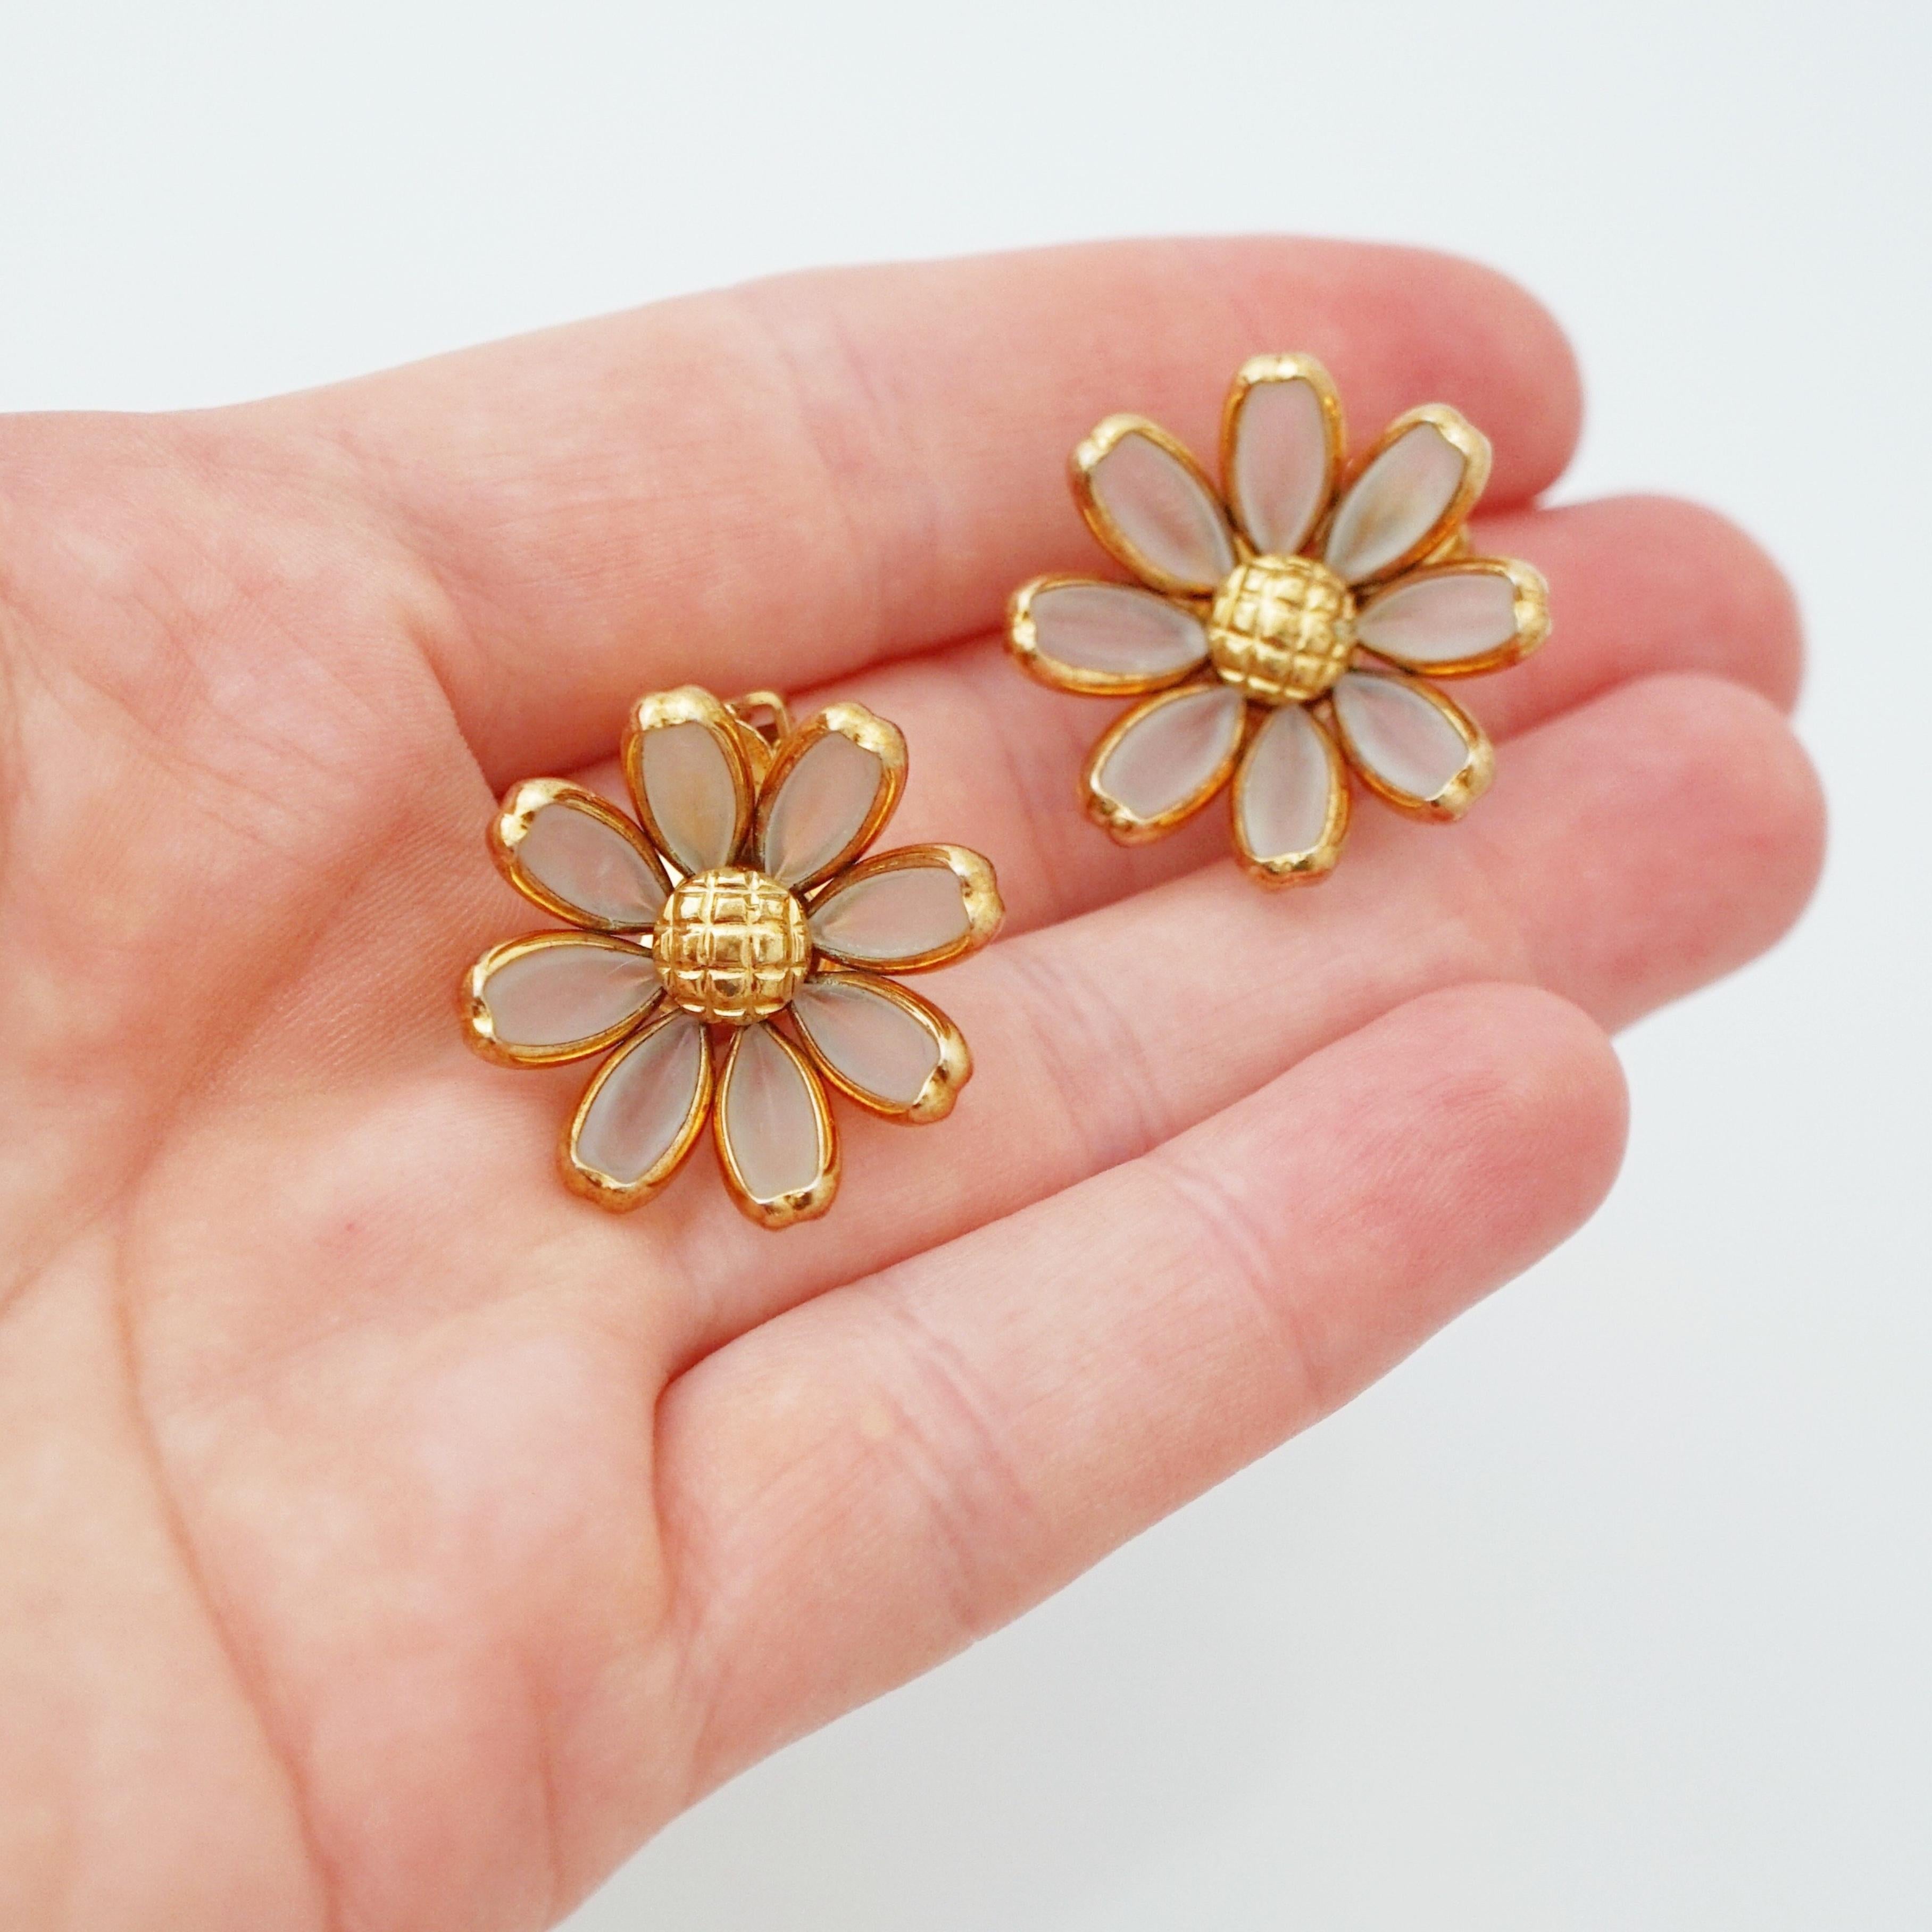 Daisy Flower Poured Frosted Glass Dimensional Earrings By Crown Trifari, 1950s For Sale 3